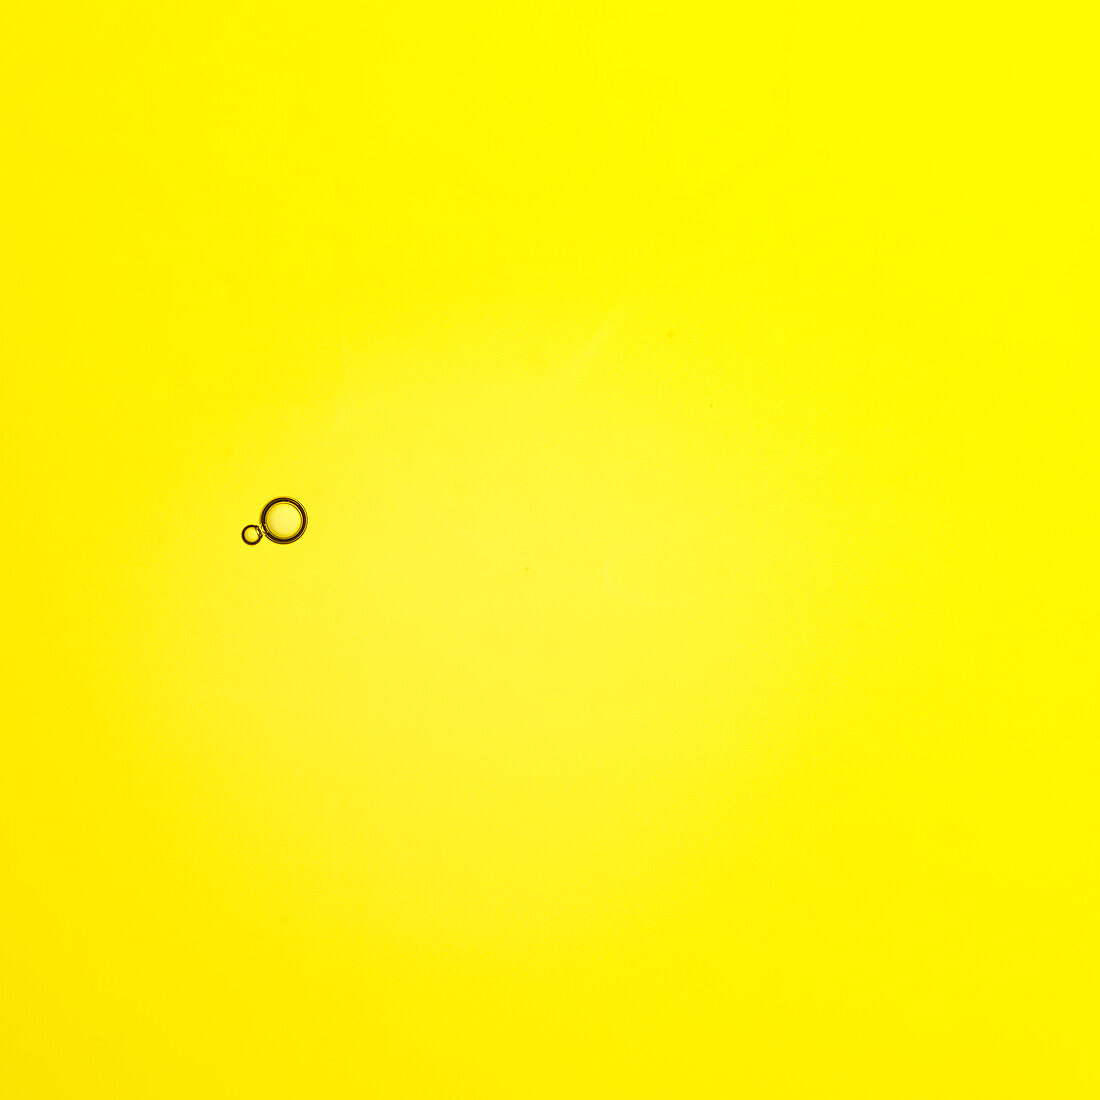 Olive oil with bubbles (full-frame)